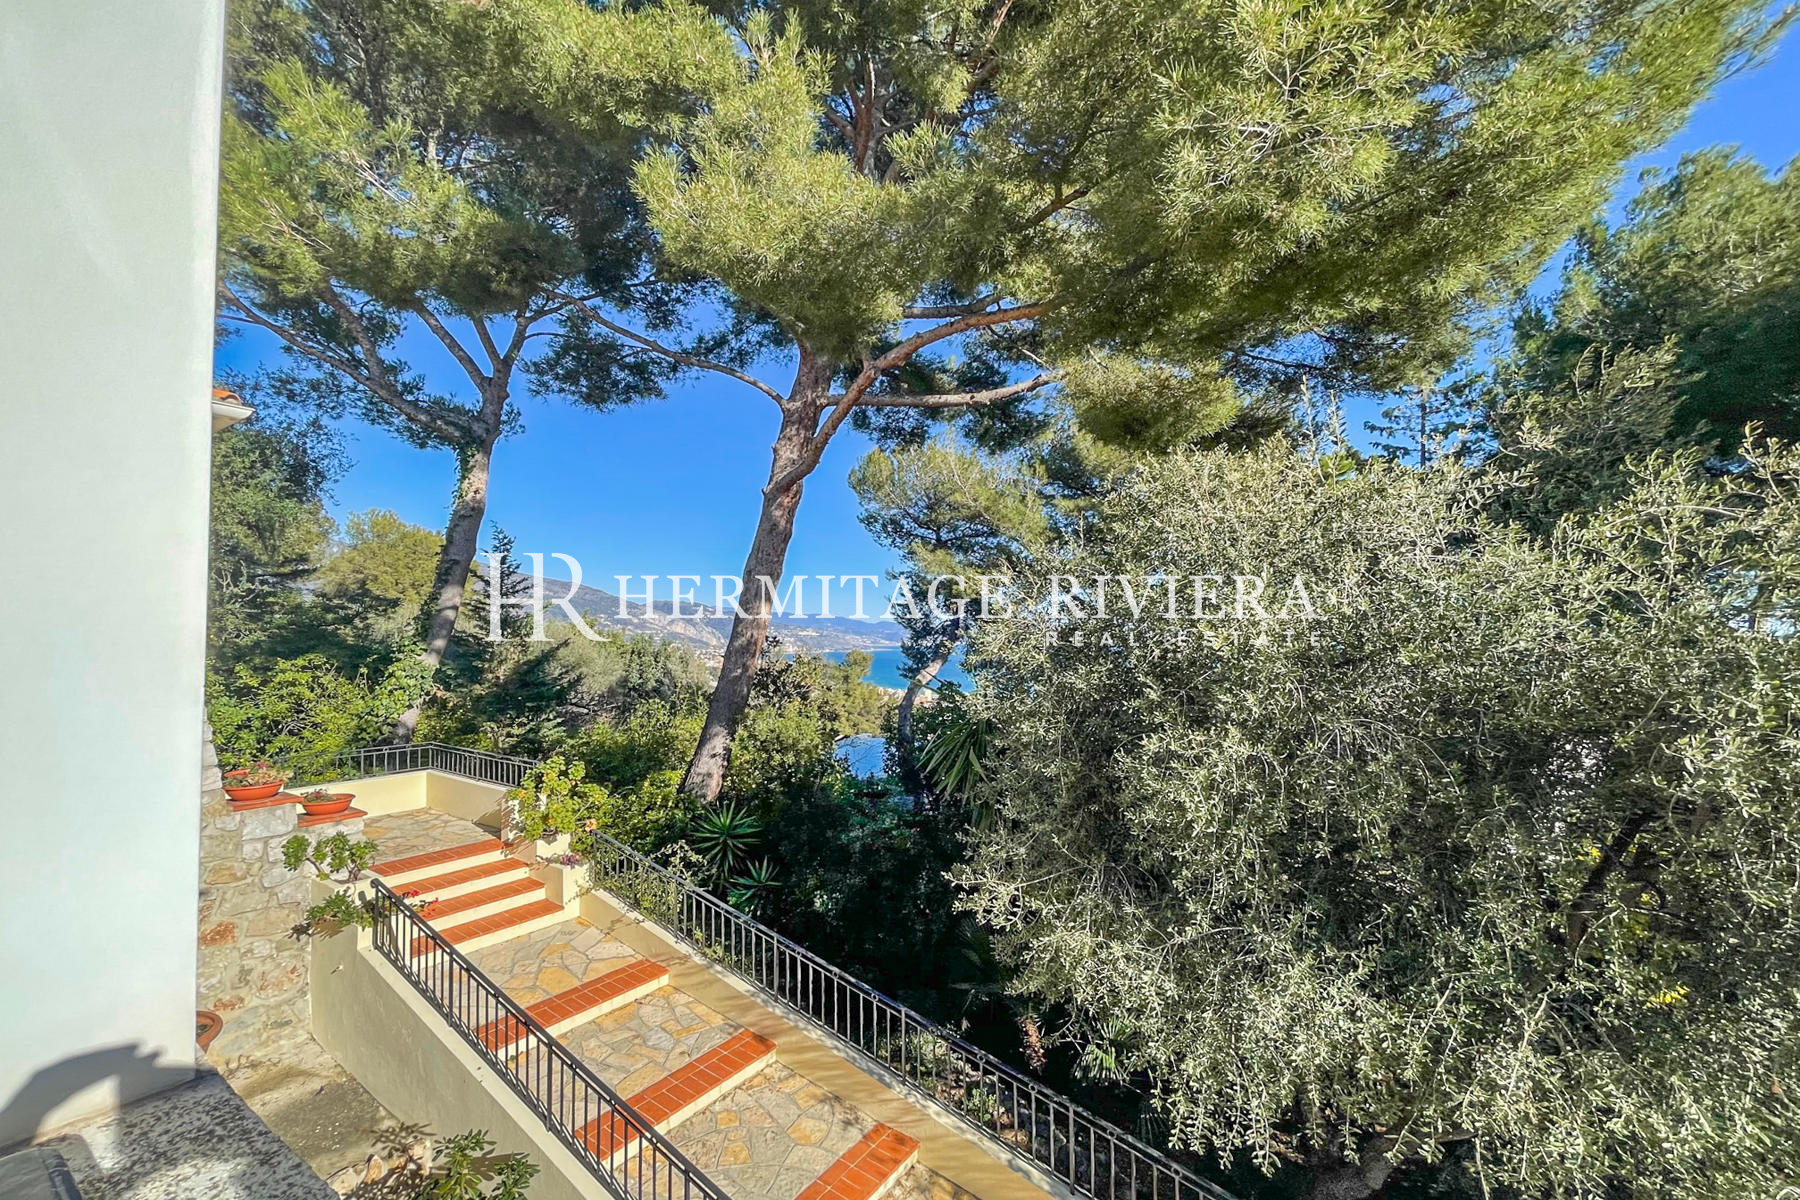 Property with views Monaco in sought after location (image 5)